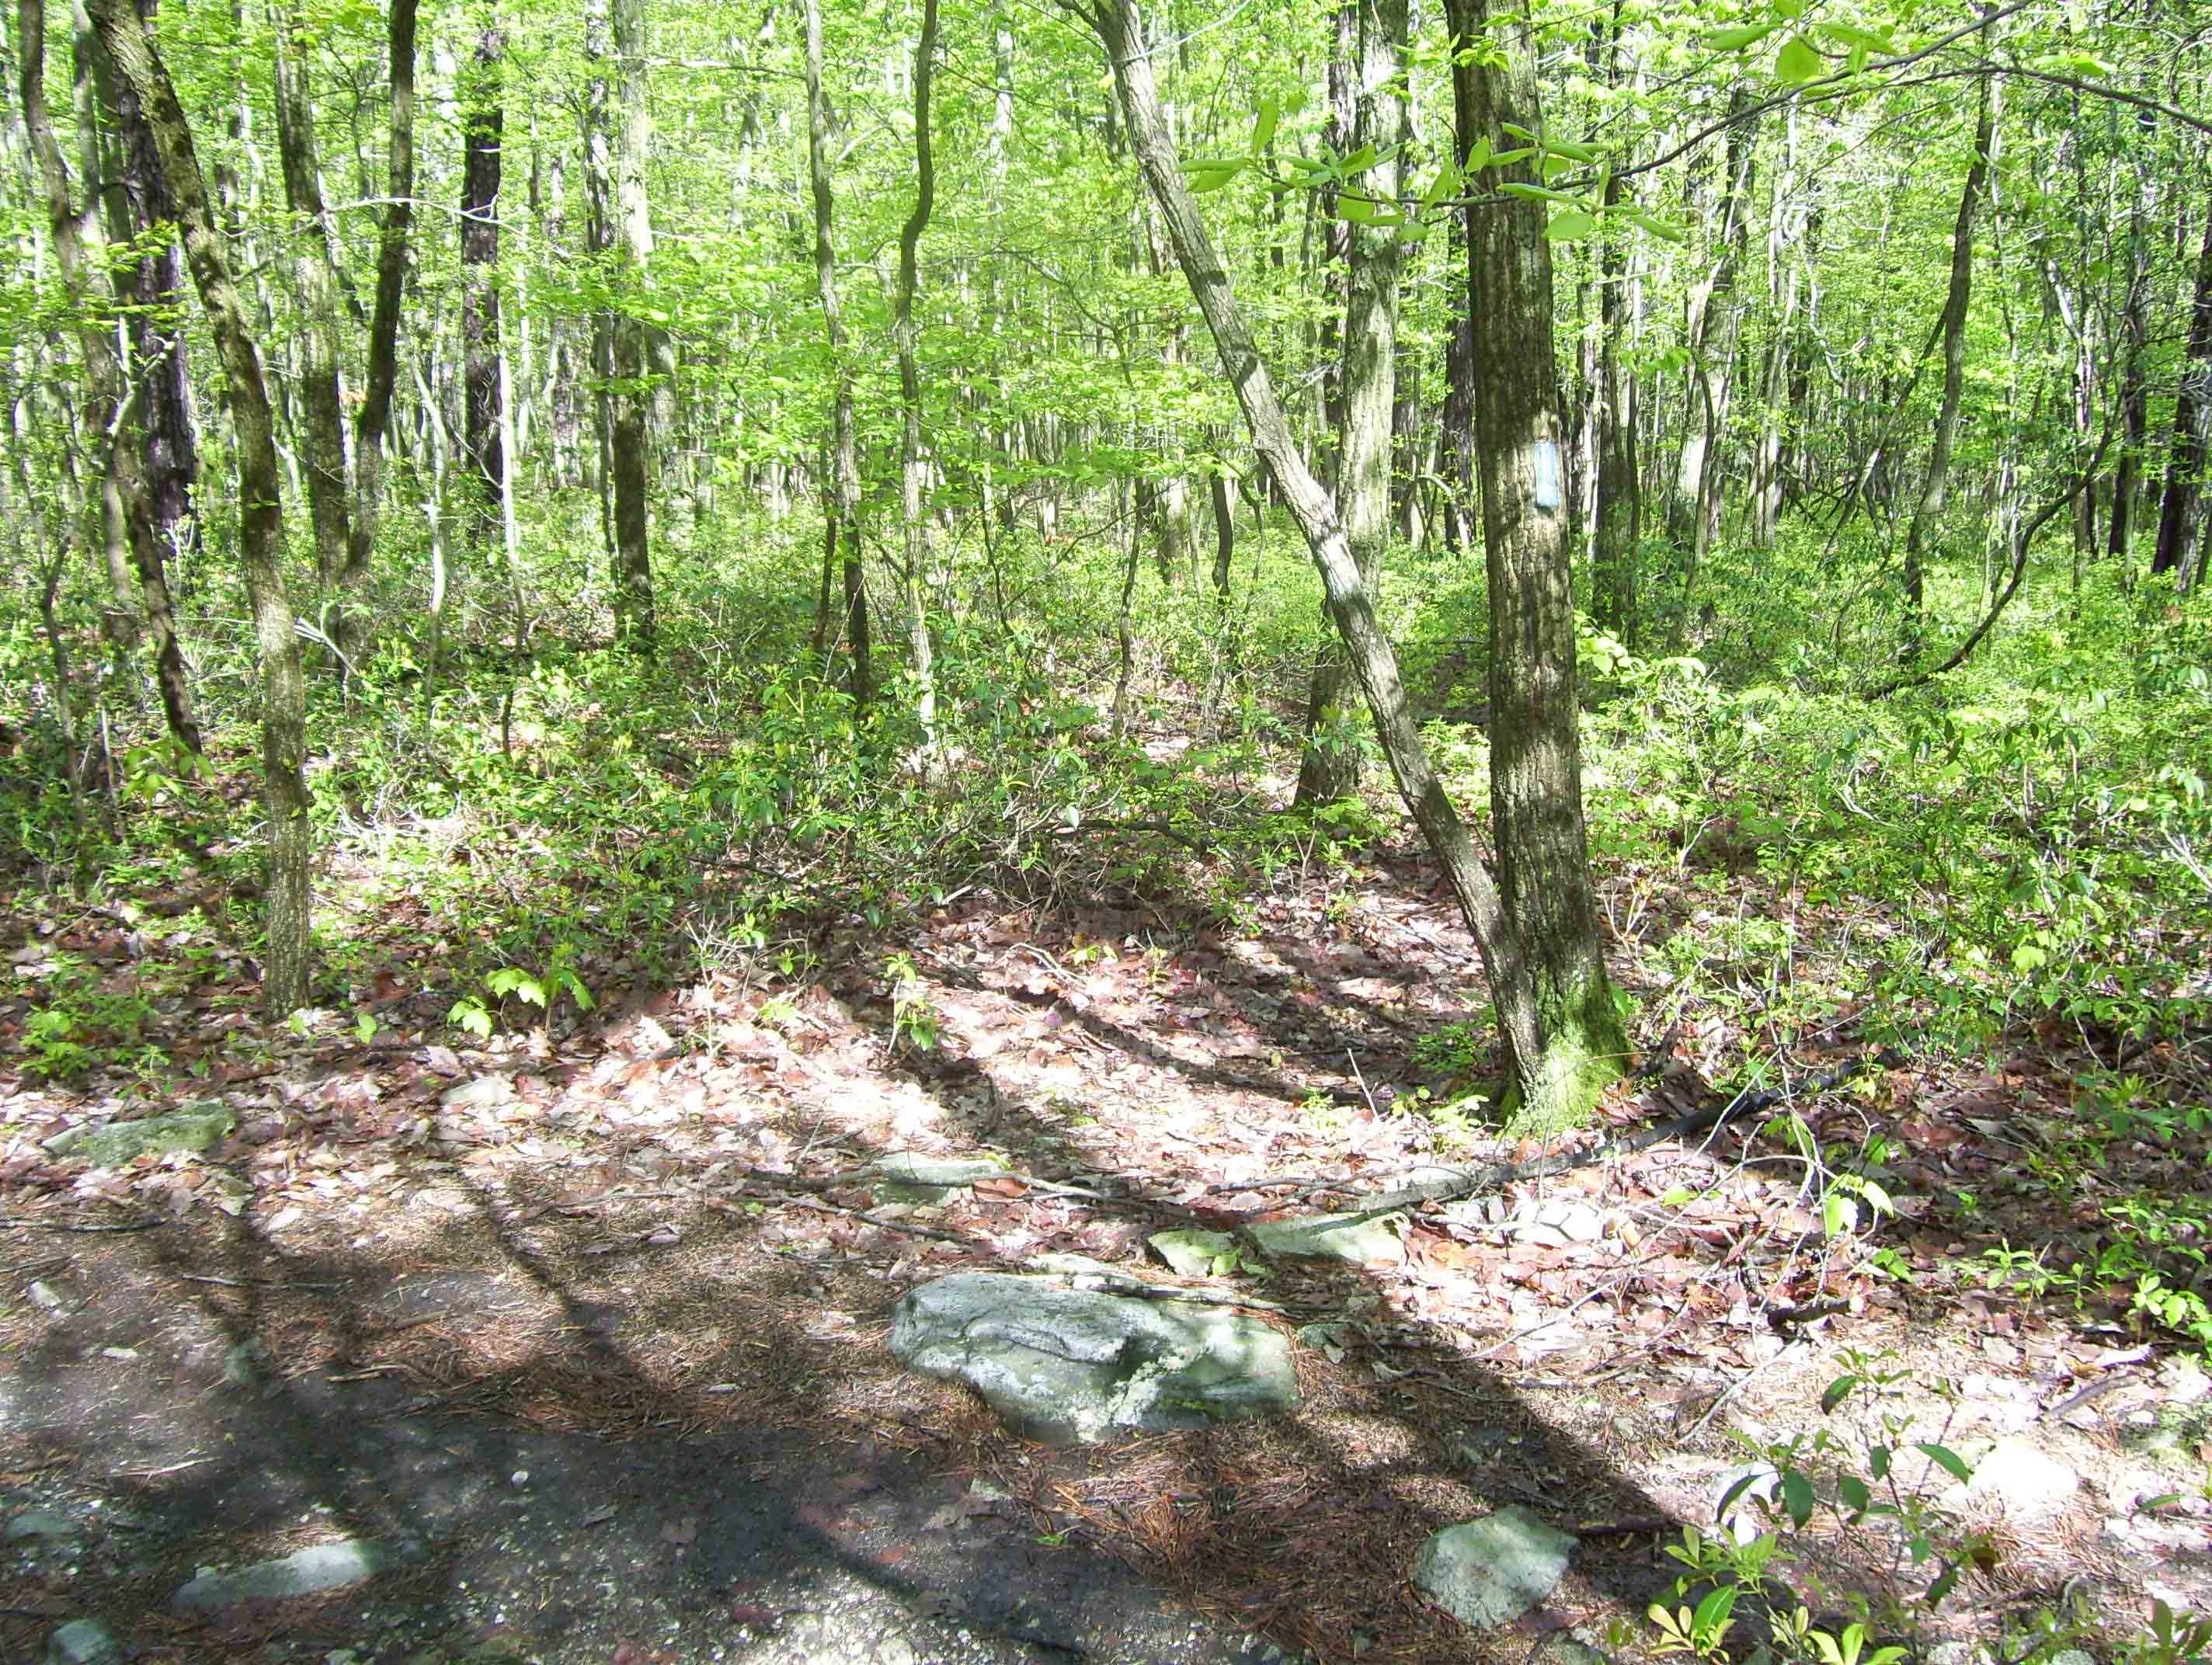 MM 4.6  Junction with the blue-blazed trail which leads 0.7 miles to Mountain Creek Campground on Pine Grove Road. In this picture taken in 2008 there is no sign and the blazes are somewhat faded. This junction could easily have been missed.  Courtesy dlcul@conncoll.edu